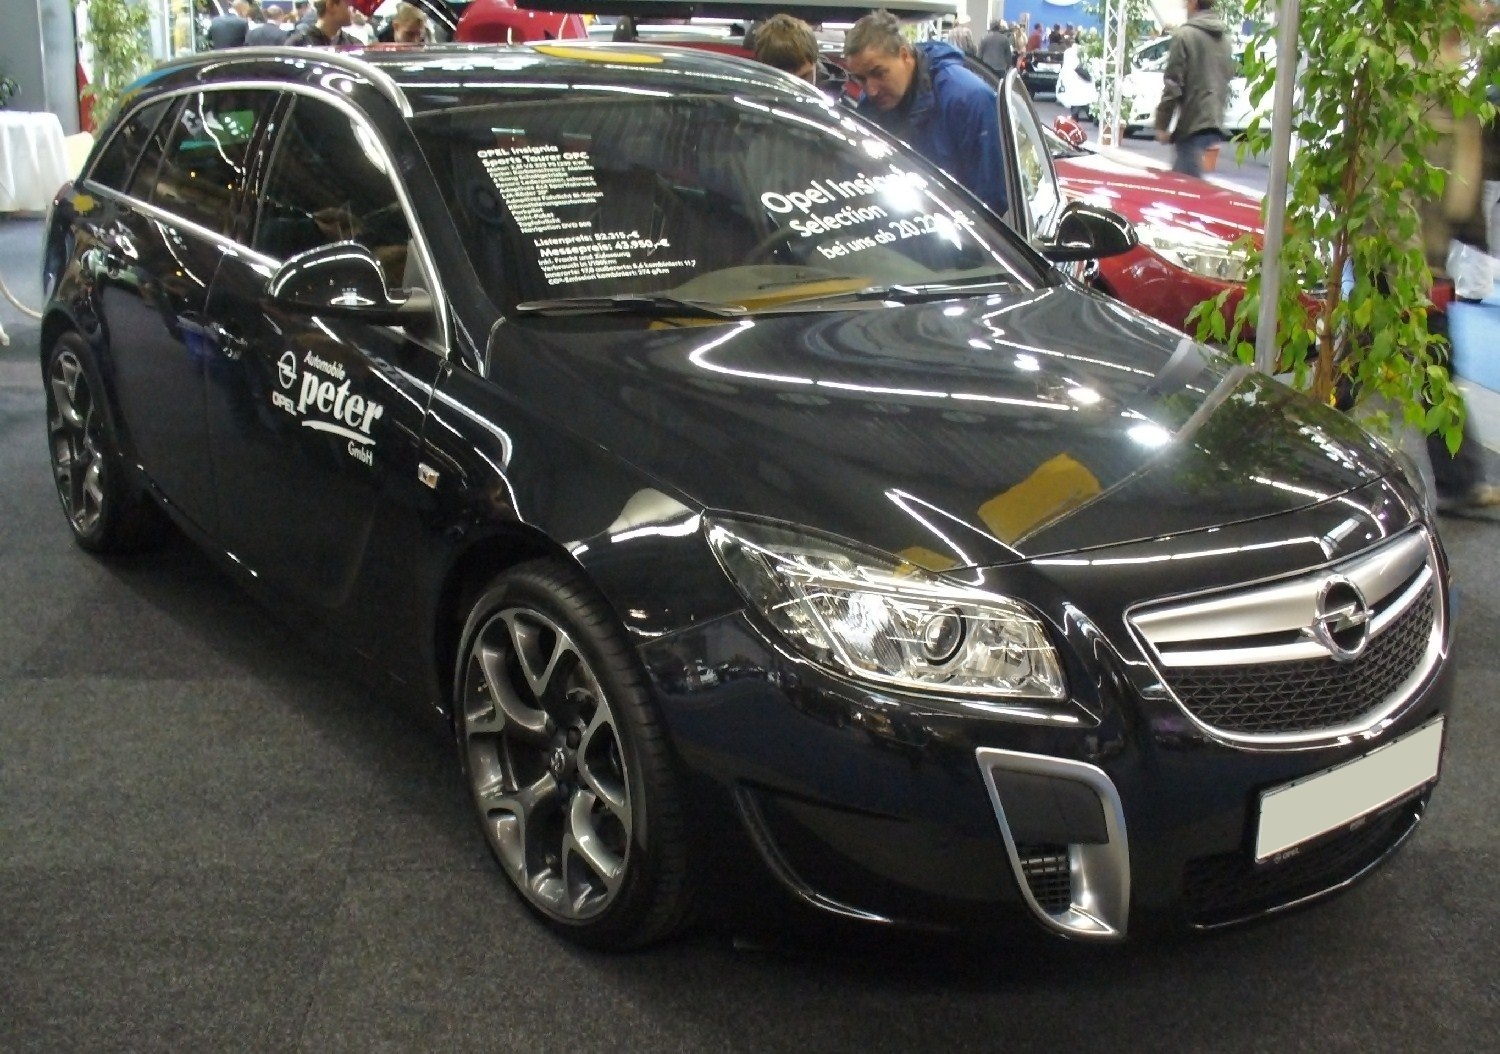 Opel Insignia OPC (2010) - pictures, information & specs